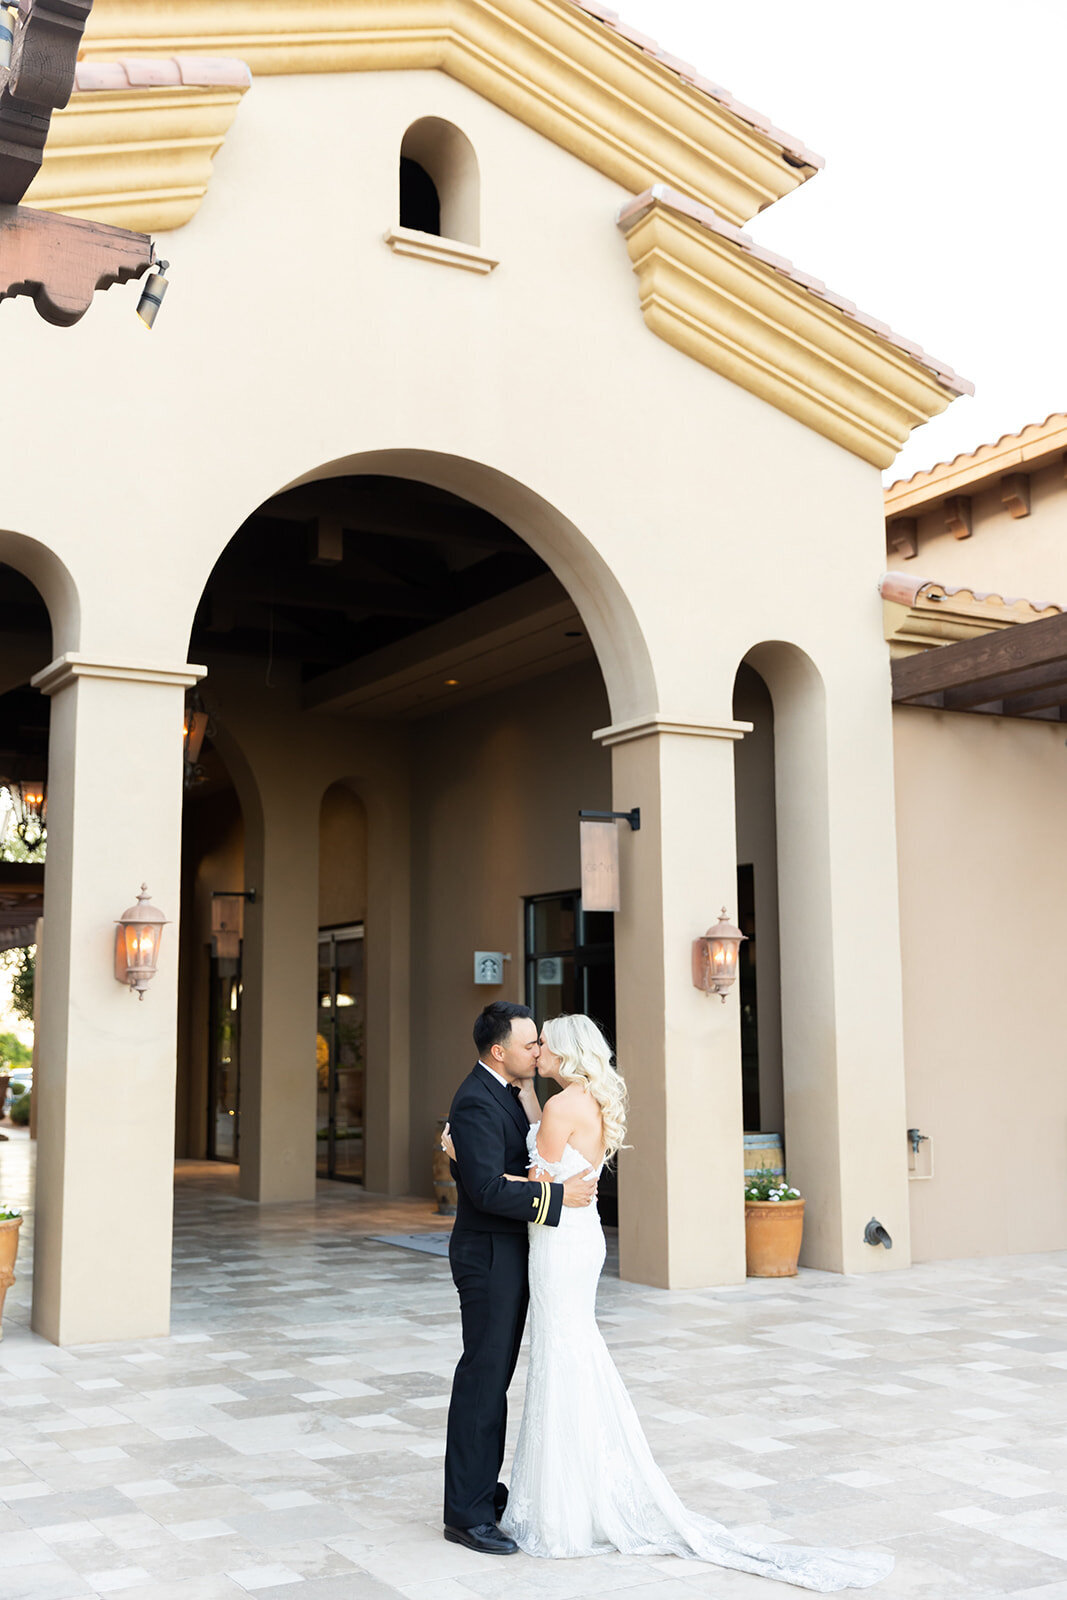 Karlie Colleen Photography - Holly & Ronnie Wedding - Seville Country Club - Gilbert Arizona-787